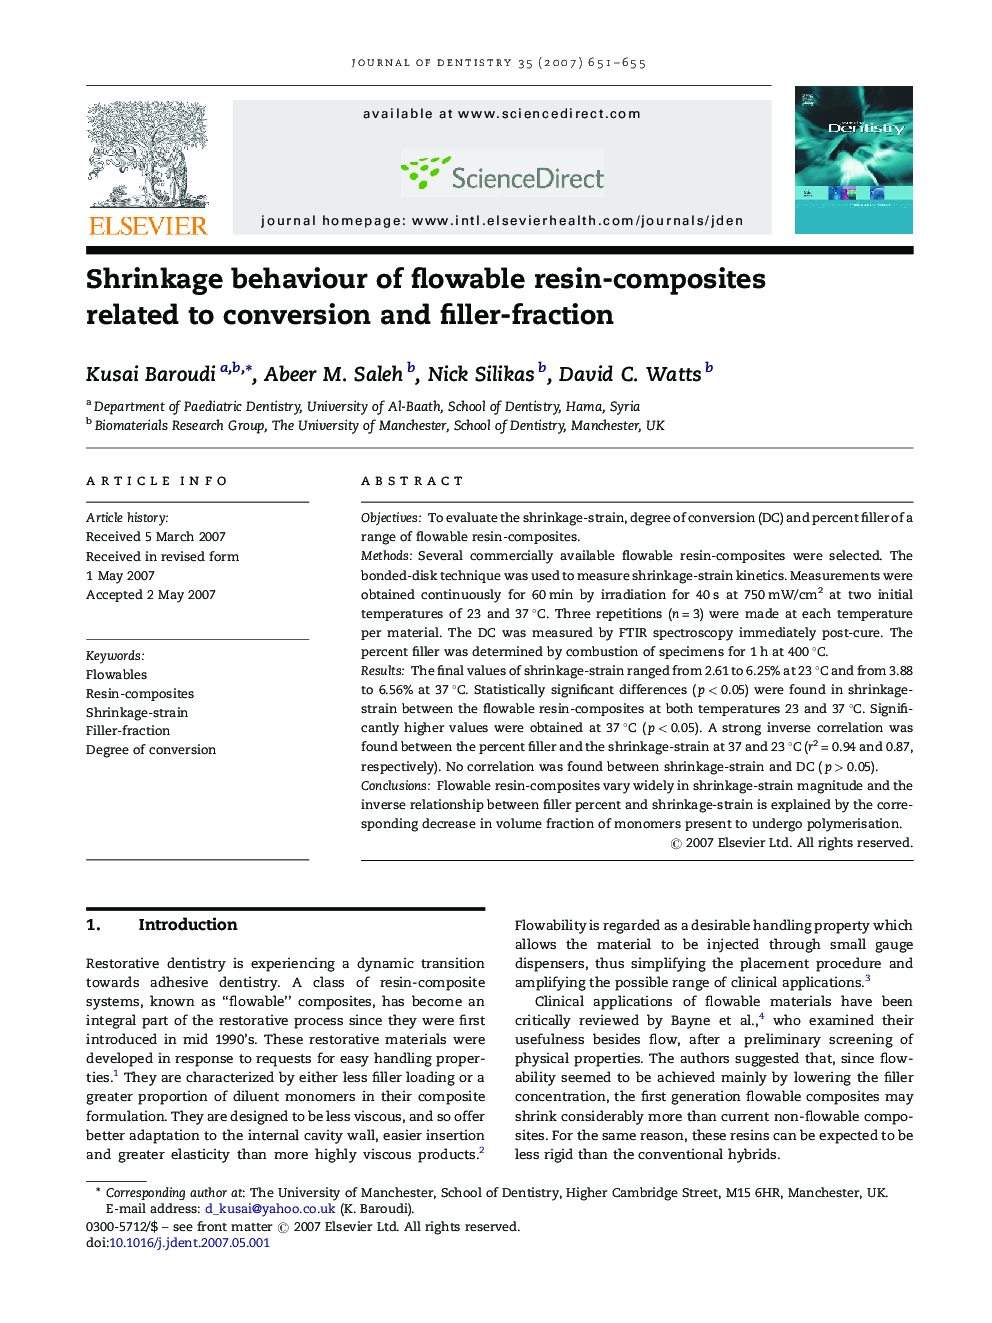 Shrinkage behaviour of flowable resin-composites related to conversion and filler-fraction